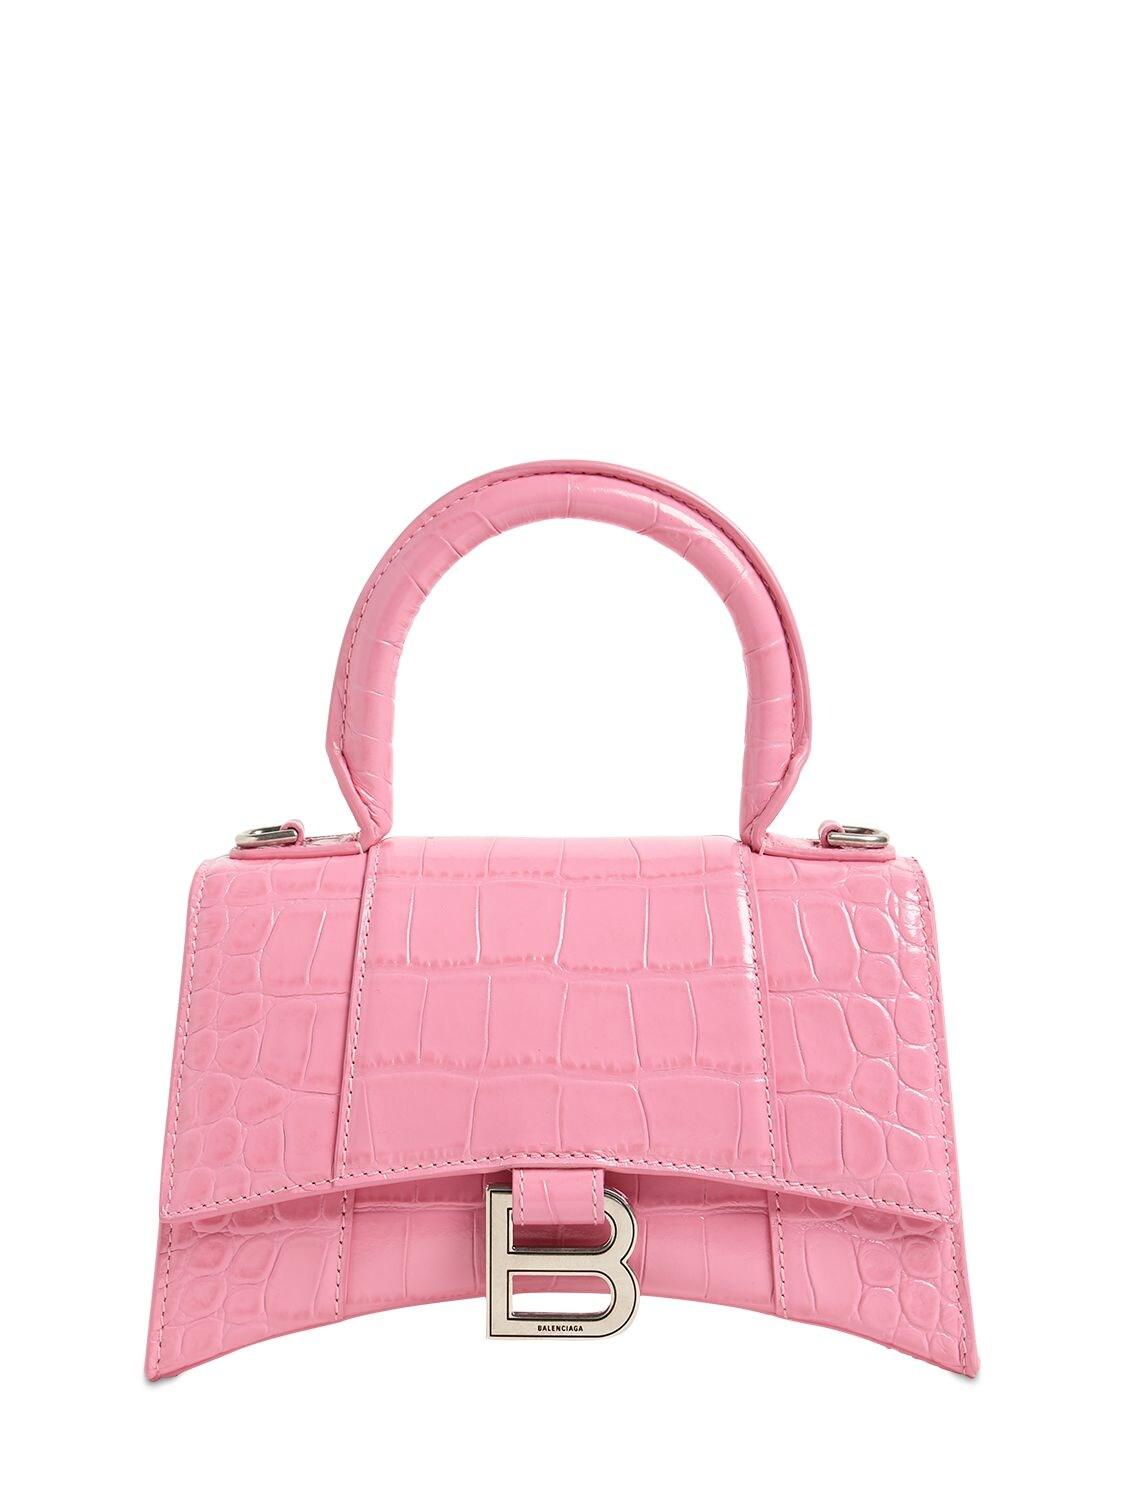 Balenciaga Leather Xs Hourglass Top Handle Bag In Crocodile Embossed  Calfskin in Baby Pink (Pink) | Lyst